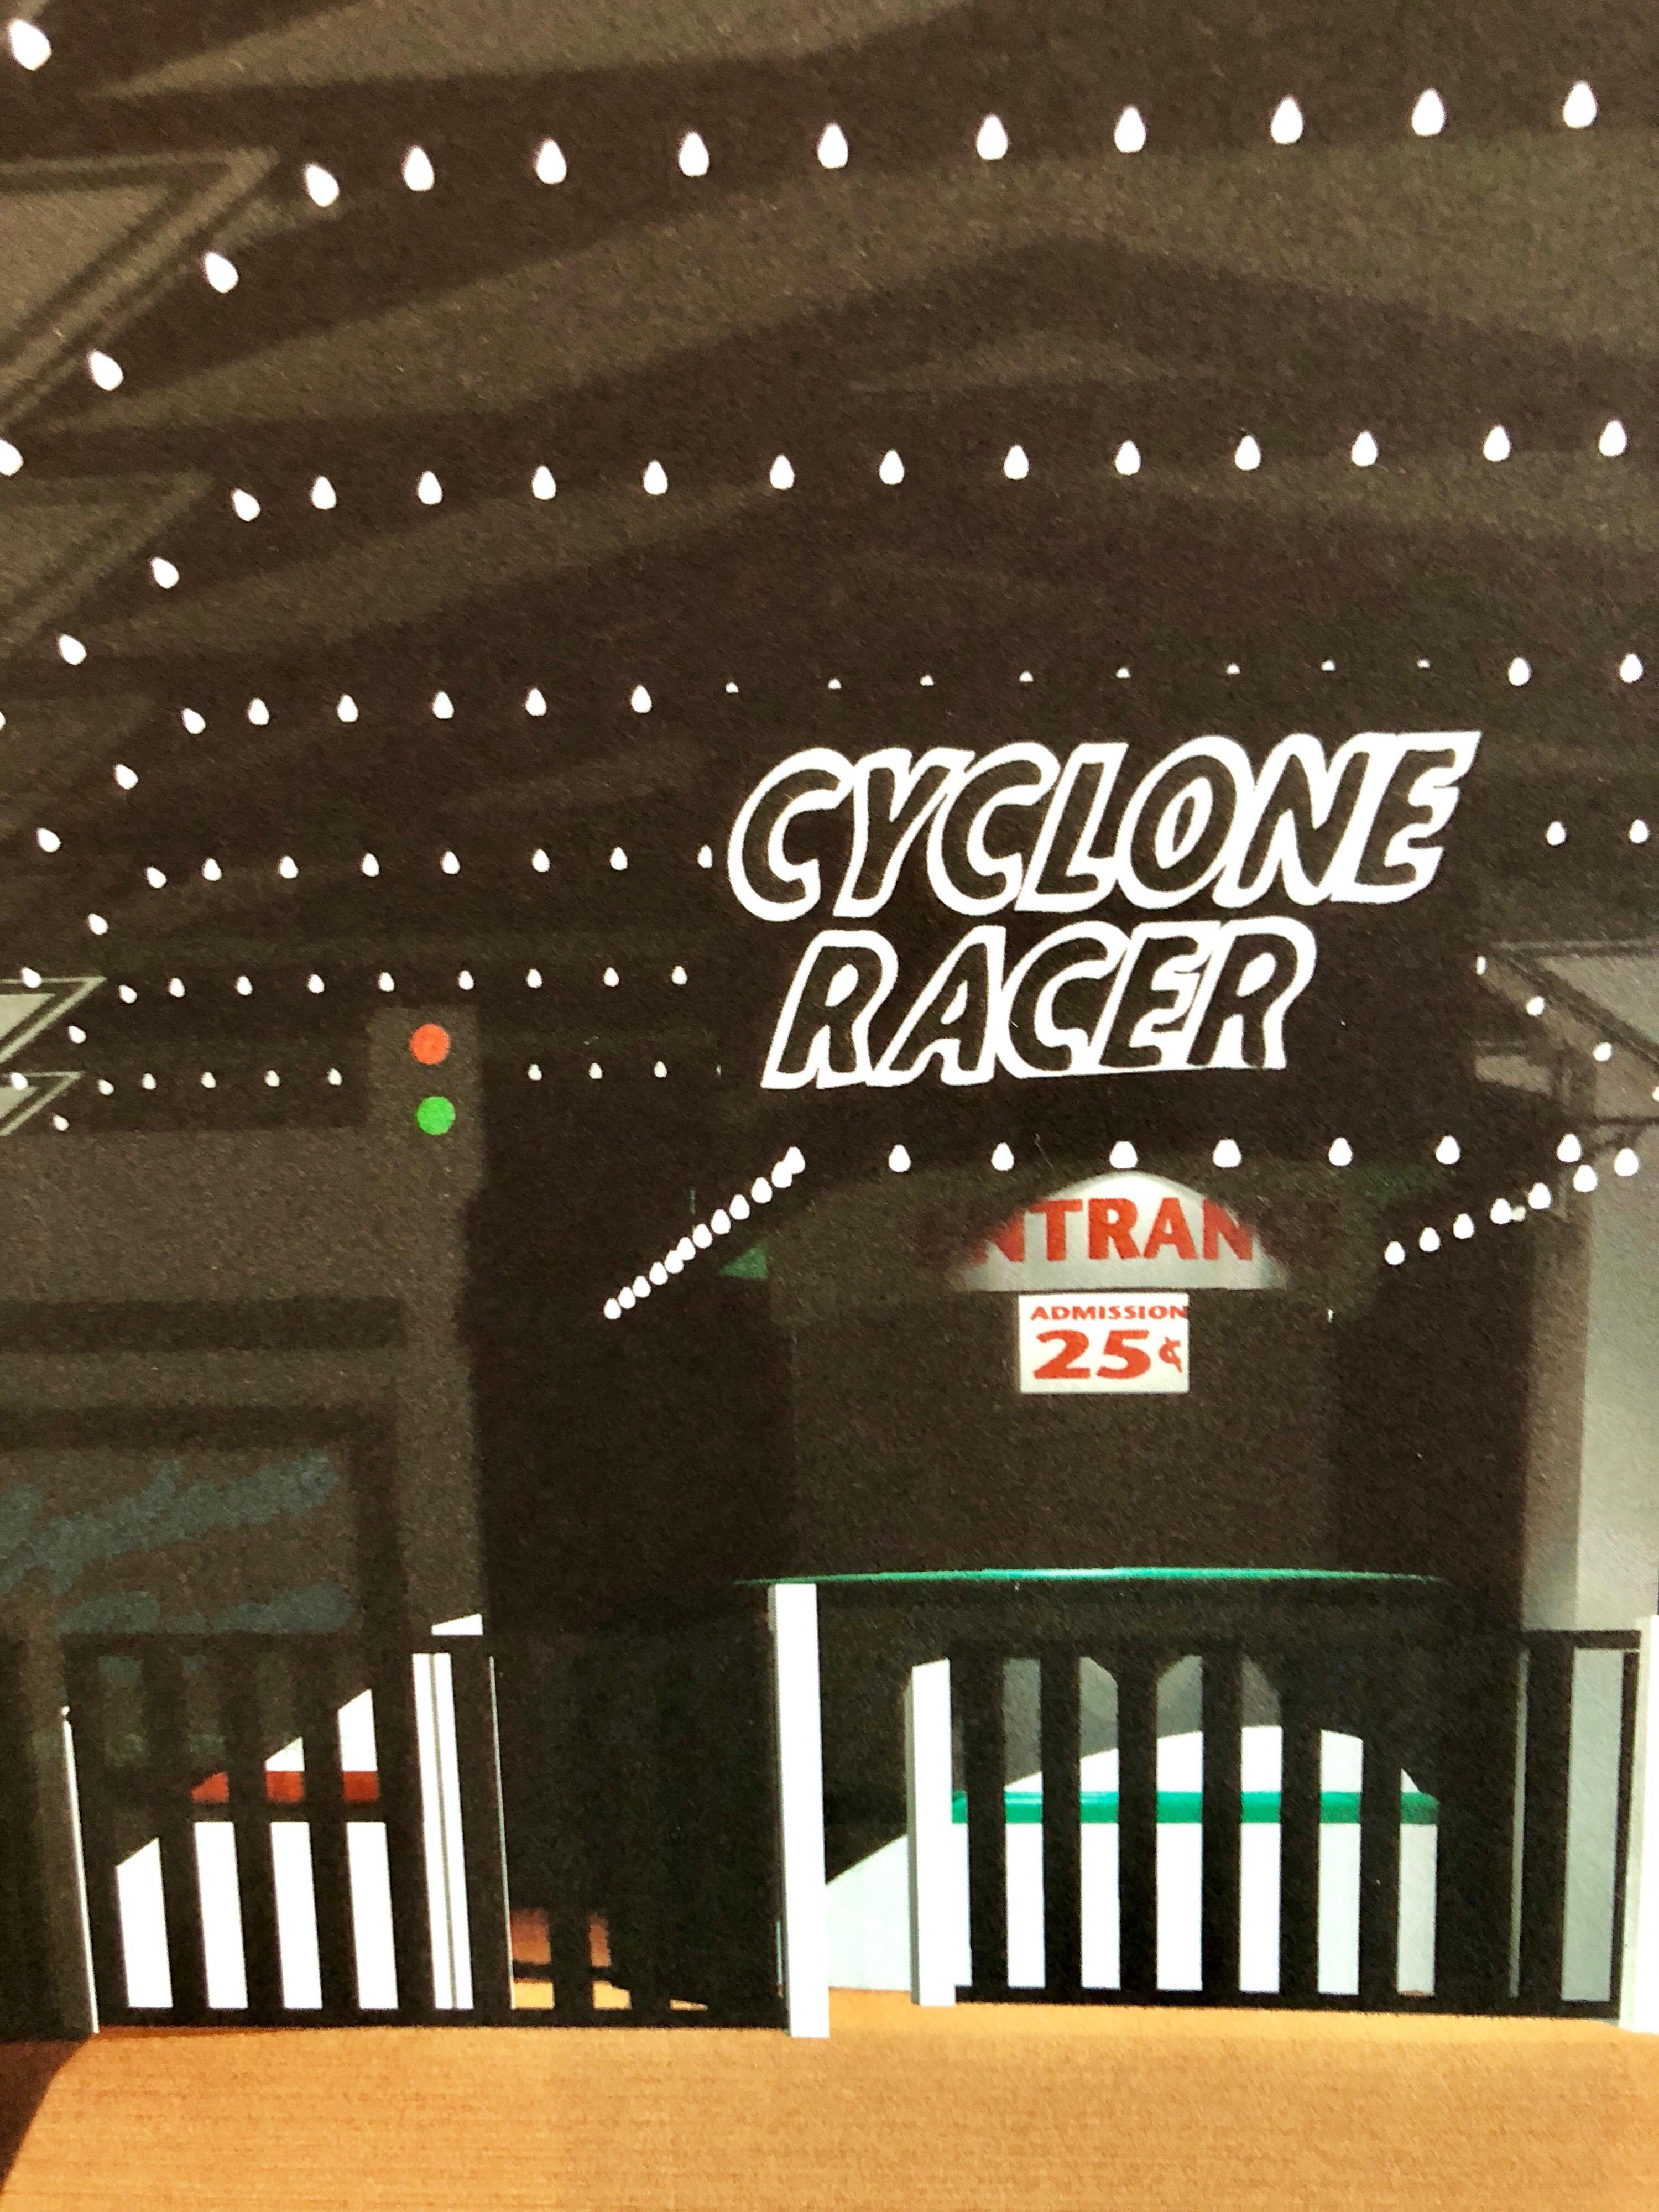 Location Proposal Iris Print Ed. 12 Hand Signed Cyclone Racer (Coney Island, NY) For Sale 2